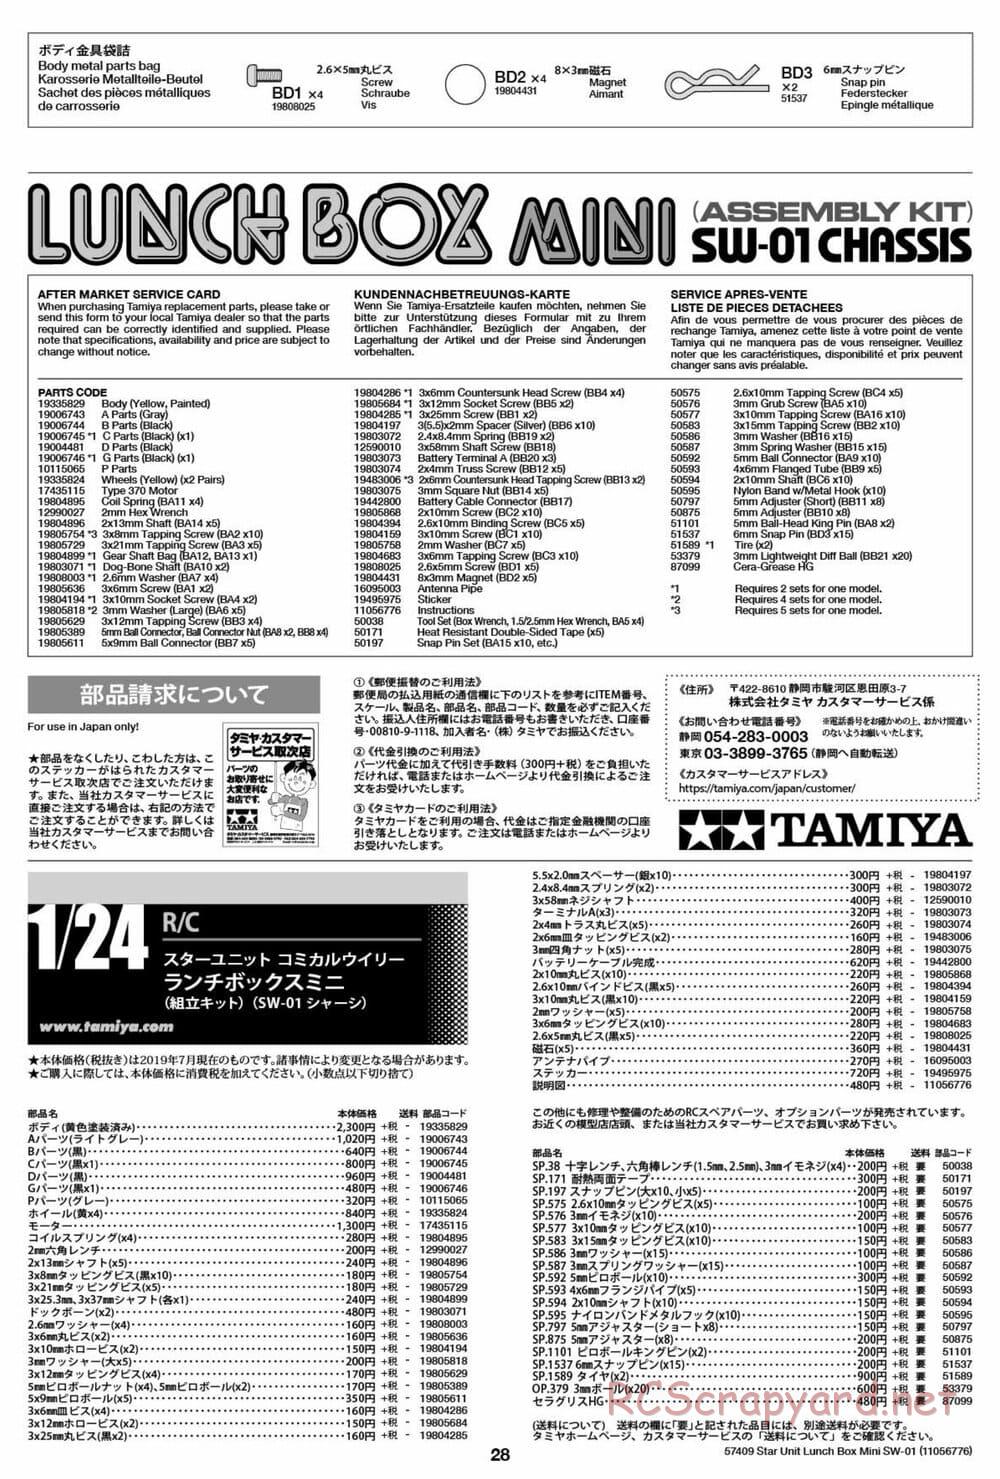 Tamiya - Lunch Box Mini - SW-01 Chassis - Manual - Page 28